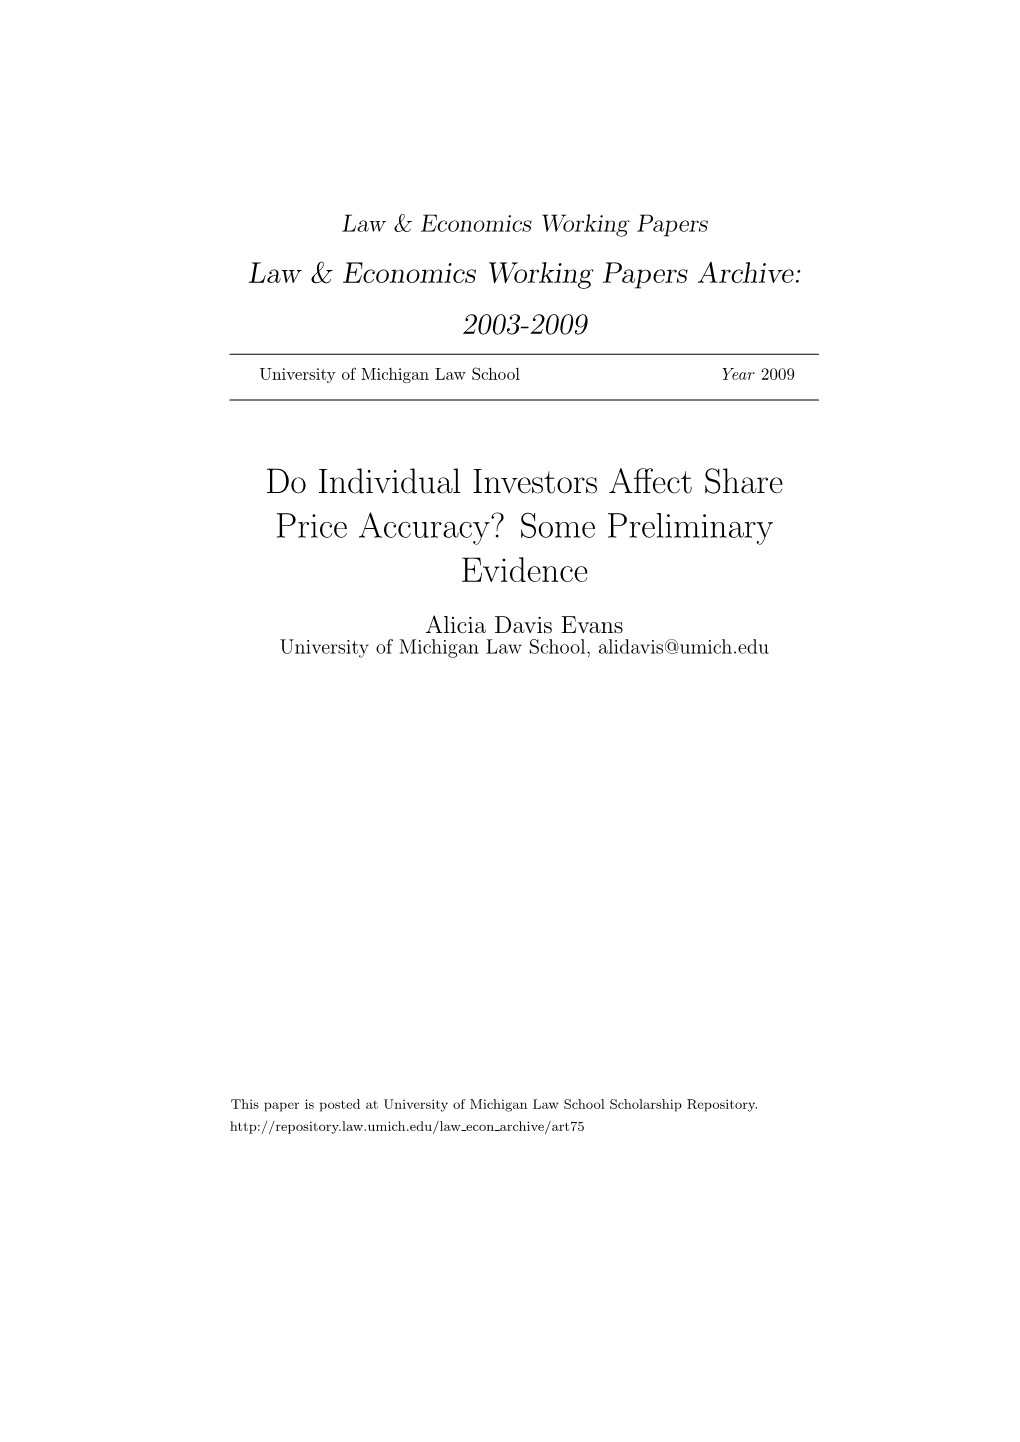 Do Individual Investors Affect Share Price Accuracy? Some Preliminary Evidence